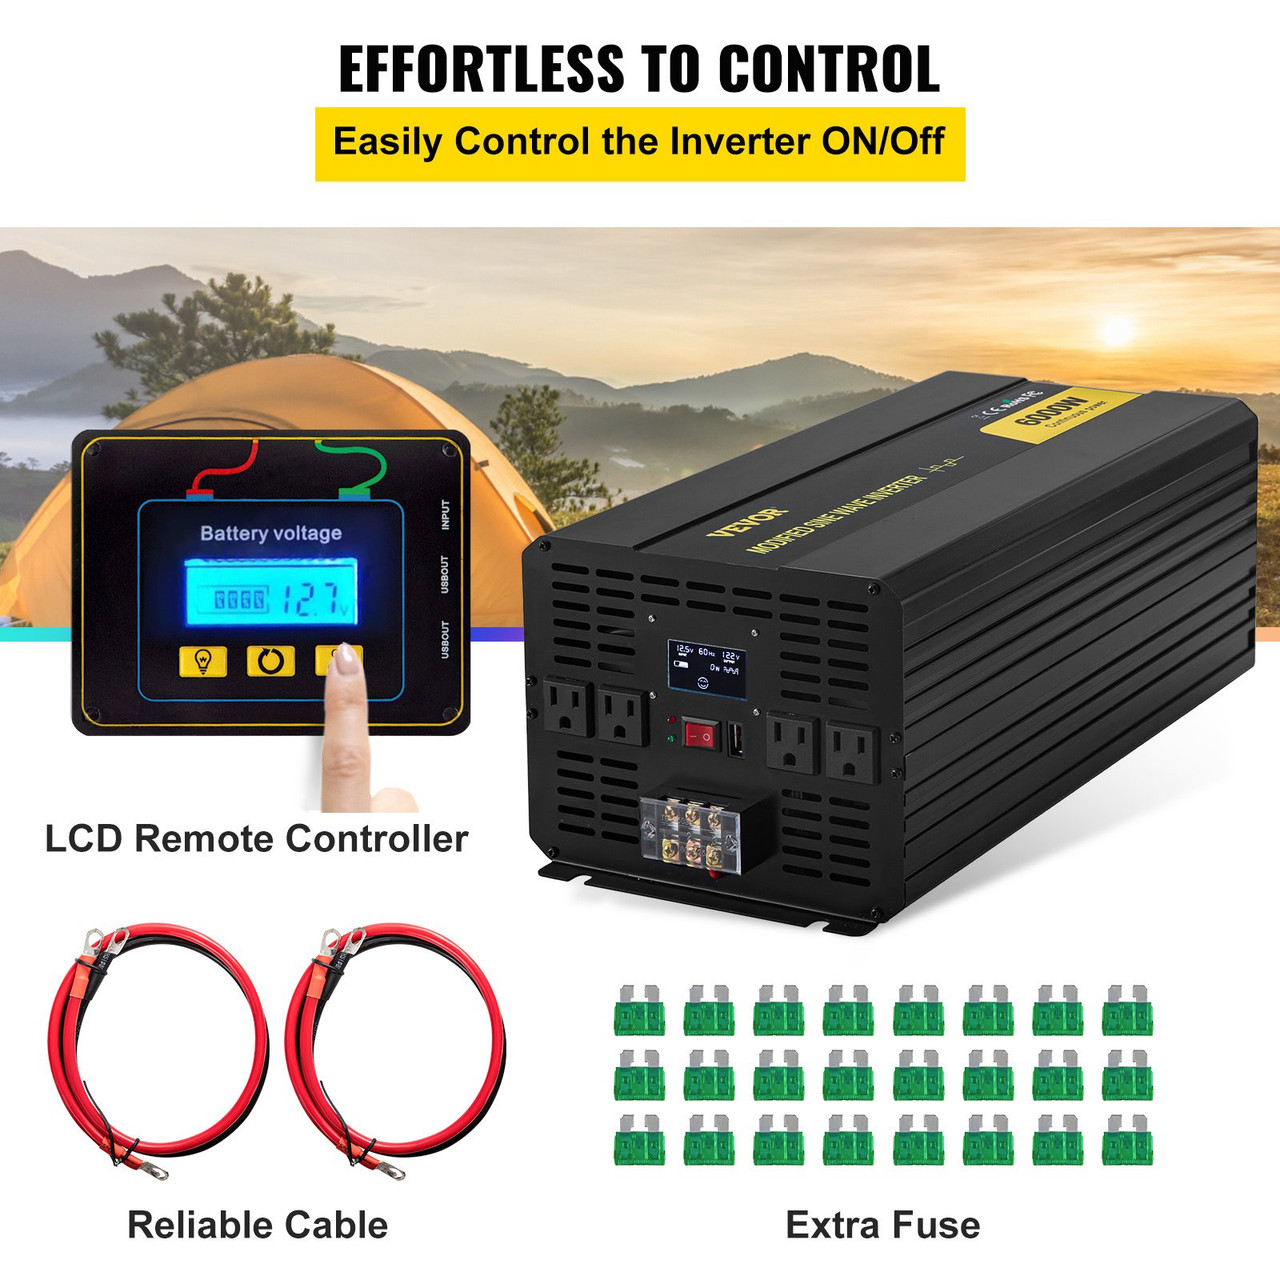 Power Inverter, 6000W Modified Sine Wave Inverter, DC 12V to AC 120V Car Converter, with LCD Display, Remote Controller, LED Indicator, AC Outlets Inverter for Truck RV Car Boat Travel Camping